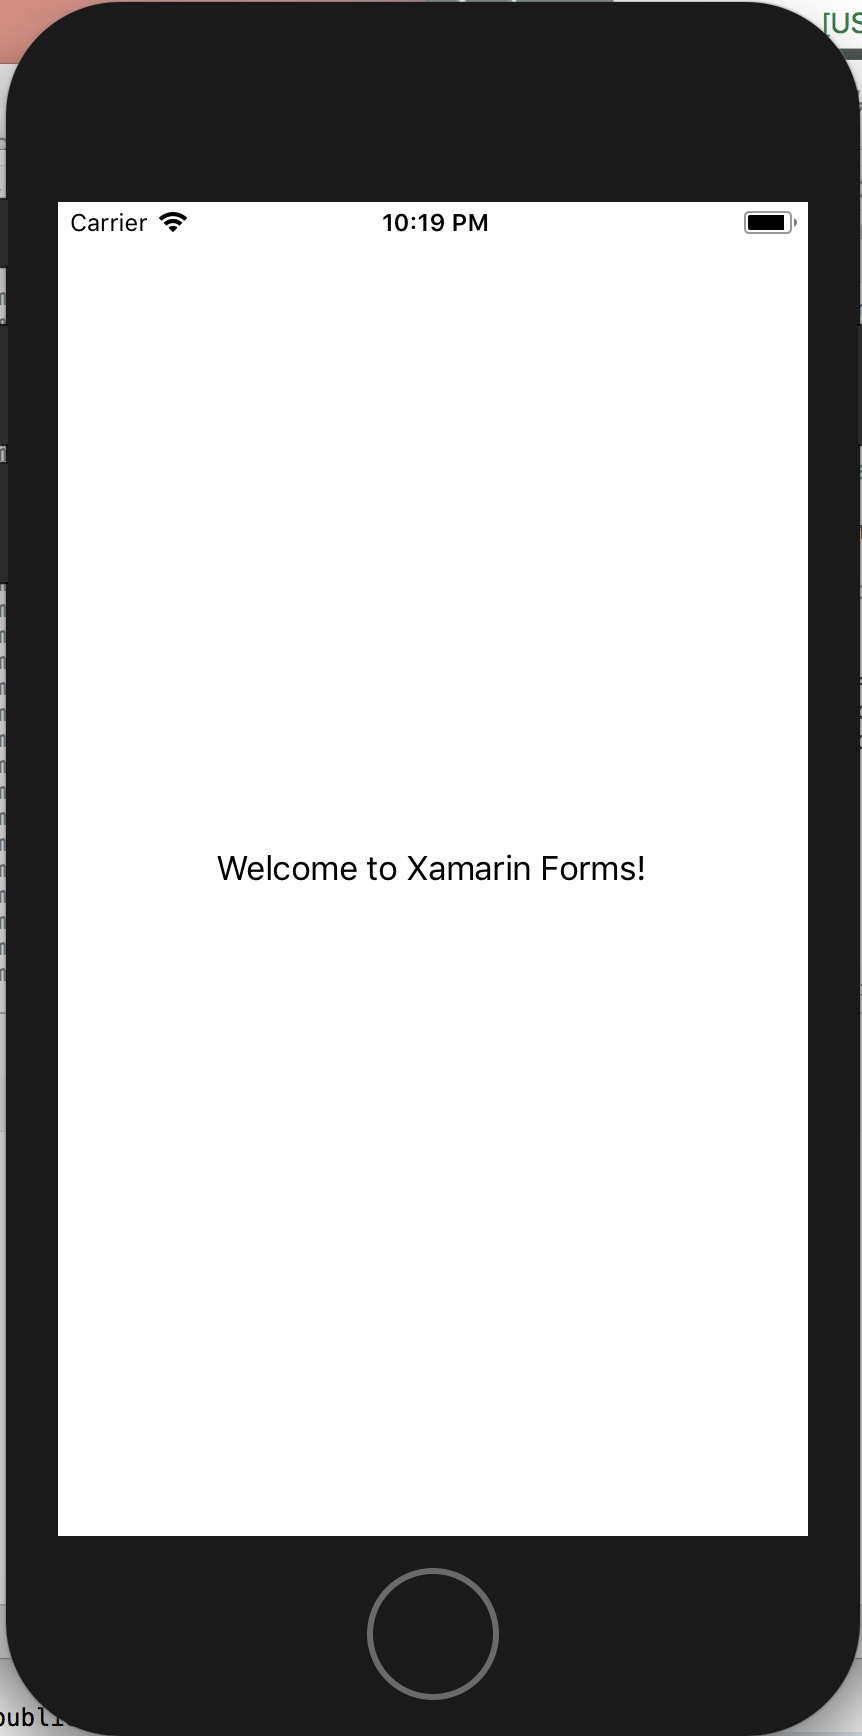 Welcome to Xamarin Forms